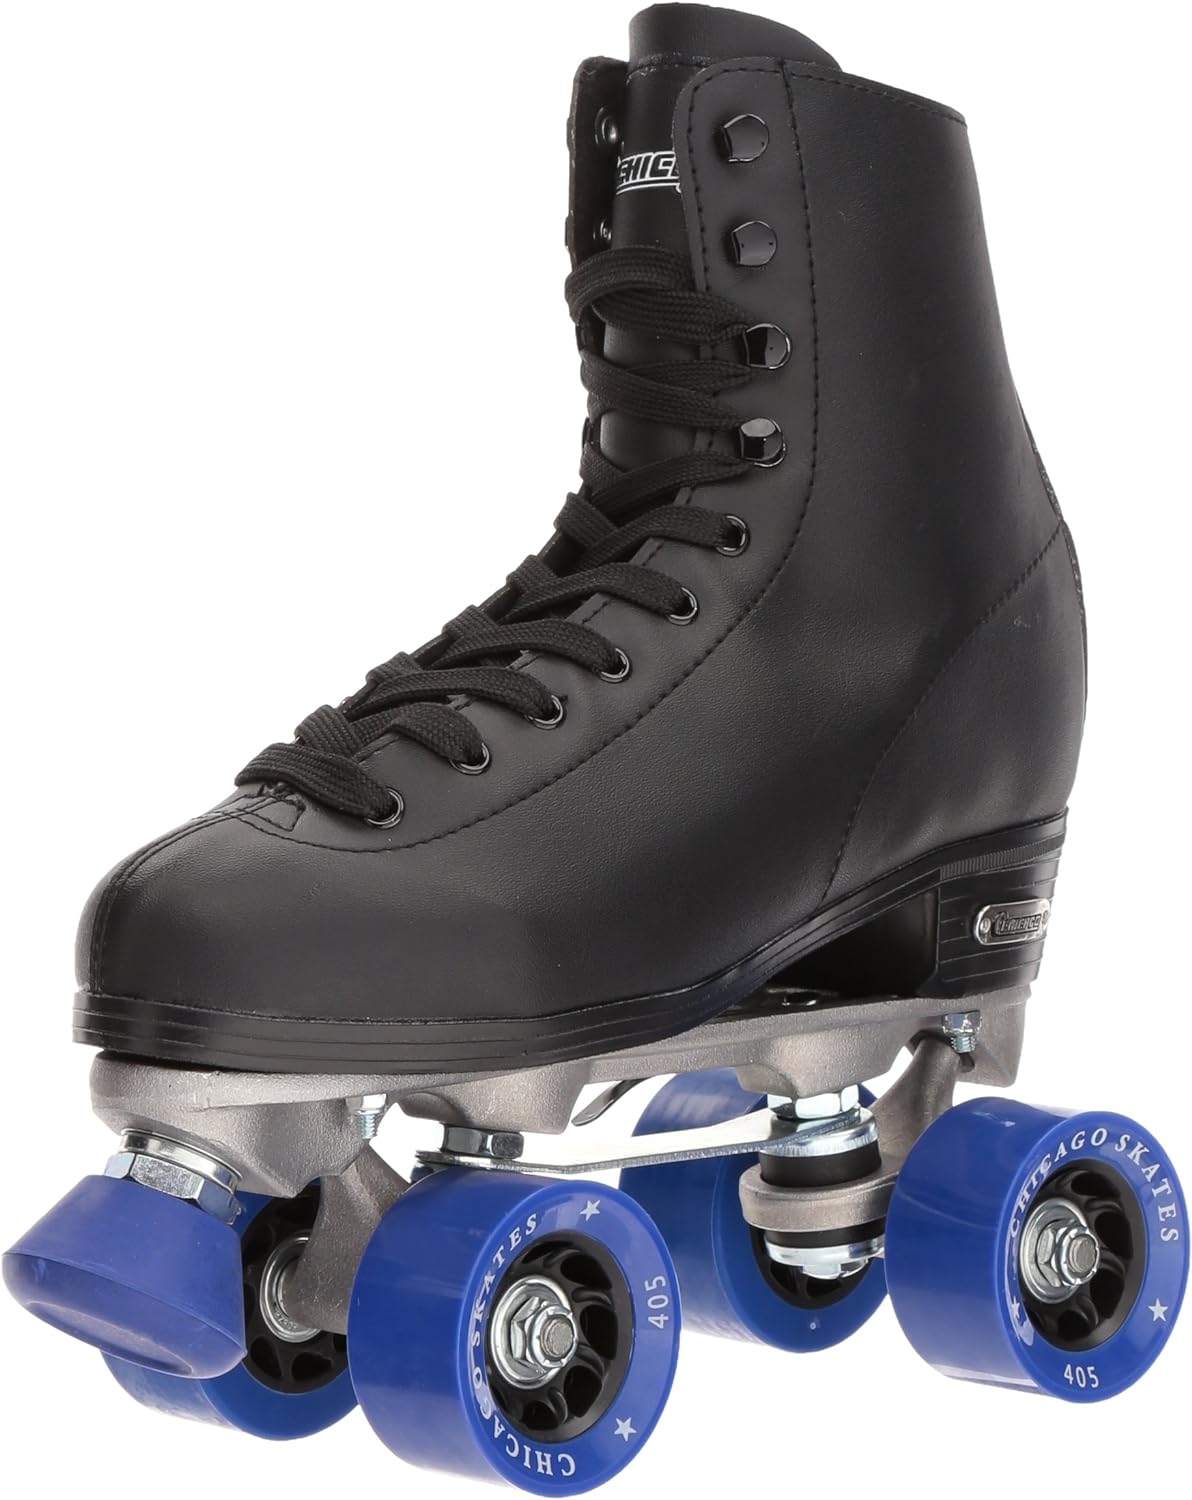 I love these Chicago Skates. I bought them for my niece who wanted a black skate. She has had them for a couple of months and they are wearing well. I skate with her, so I see  her with them on almost weekly. They are comfortable, fit well, and a great value for the money. The wheels and ball bearings spin easily once you adjust them a little. They include a tool to tighten or loosen the wheels based on how tight you want your wheels. The only challenge is that the tool is not strong enough to complete the job, so by wheel two, I had to use my own tools to tighten the wheels. However, it was well worth it and my niece loves her skates and uses them all the time. I would definitely recommend Chicago Skates.